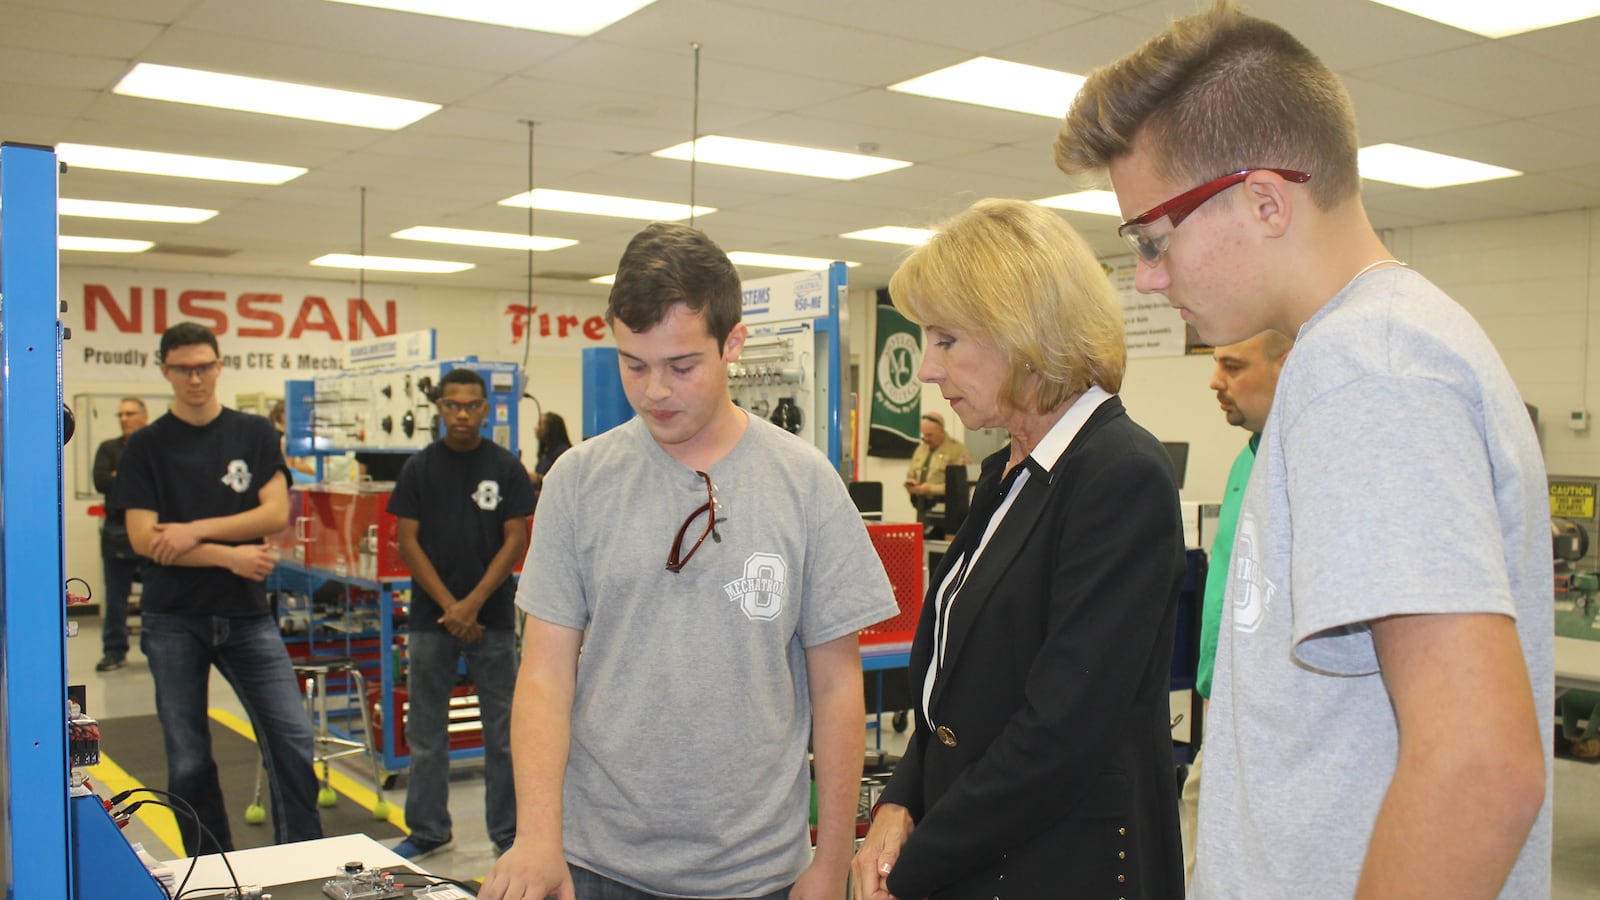 Secretary of Education Betsy DeVos talks with students during a 2017 tour of career and technical education programs at Oakland High School in Murfreesboro, Tennessee.